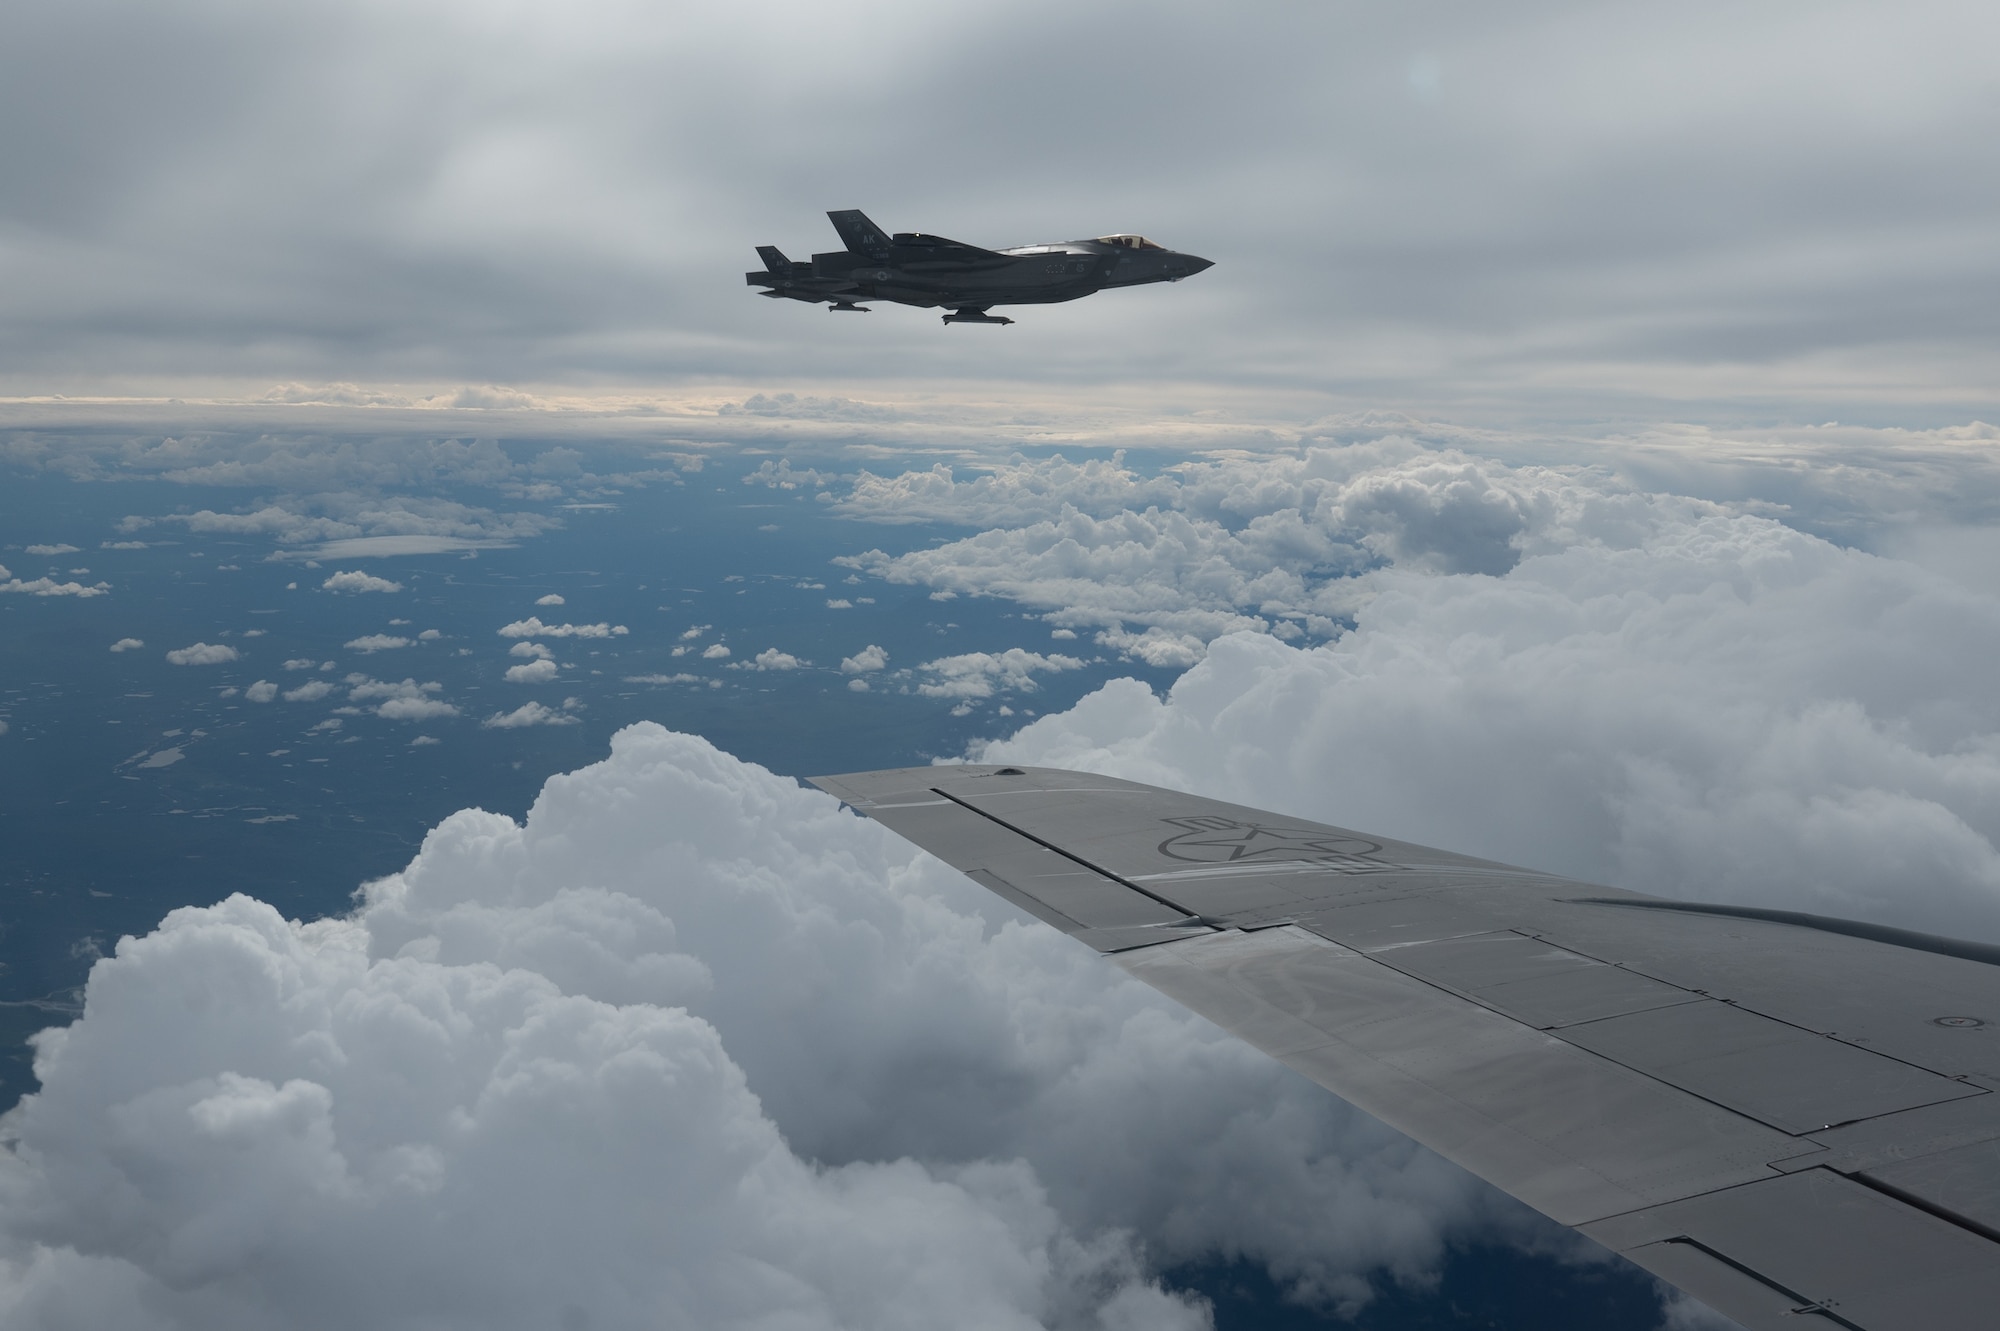 U.S. Air Force F-35A Lightning IIs assigned to the 356th Fighter Squadron at Eielson Air Force Base, awaits refueling from a KC-135 Stratotanker assigned to the 168th Air Refueling Squadron over the Joint Pacific-Alaska Range Complex during Red Flag-Alaska 23-3, Aug. 15, 2023.